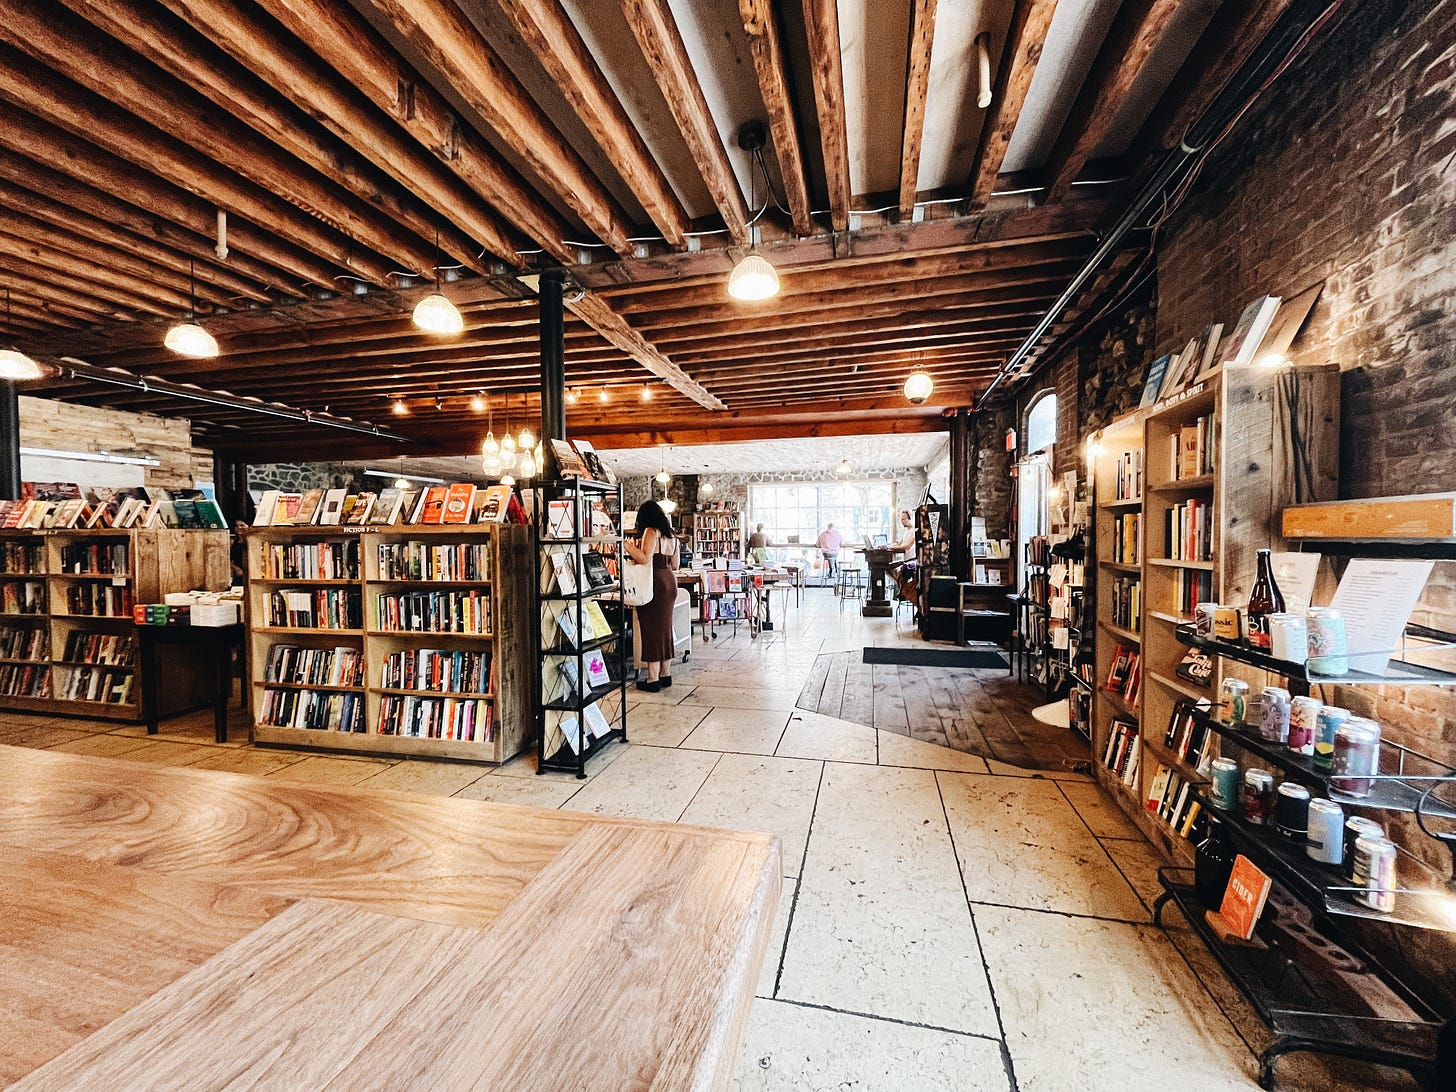 The inside of the beautiful rustic bookstore “Rough Draft” in Kingston, NY with exposed wooden beams on the low ceiling, brick walls, and many bookshelves full of countless colorful books.